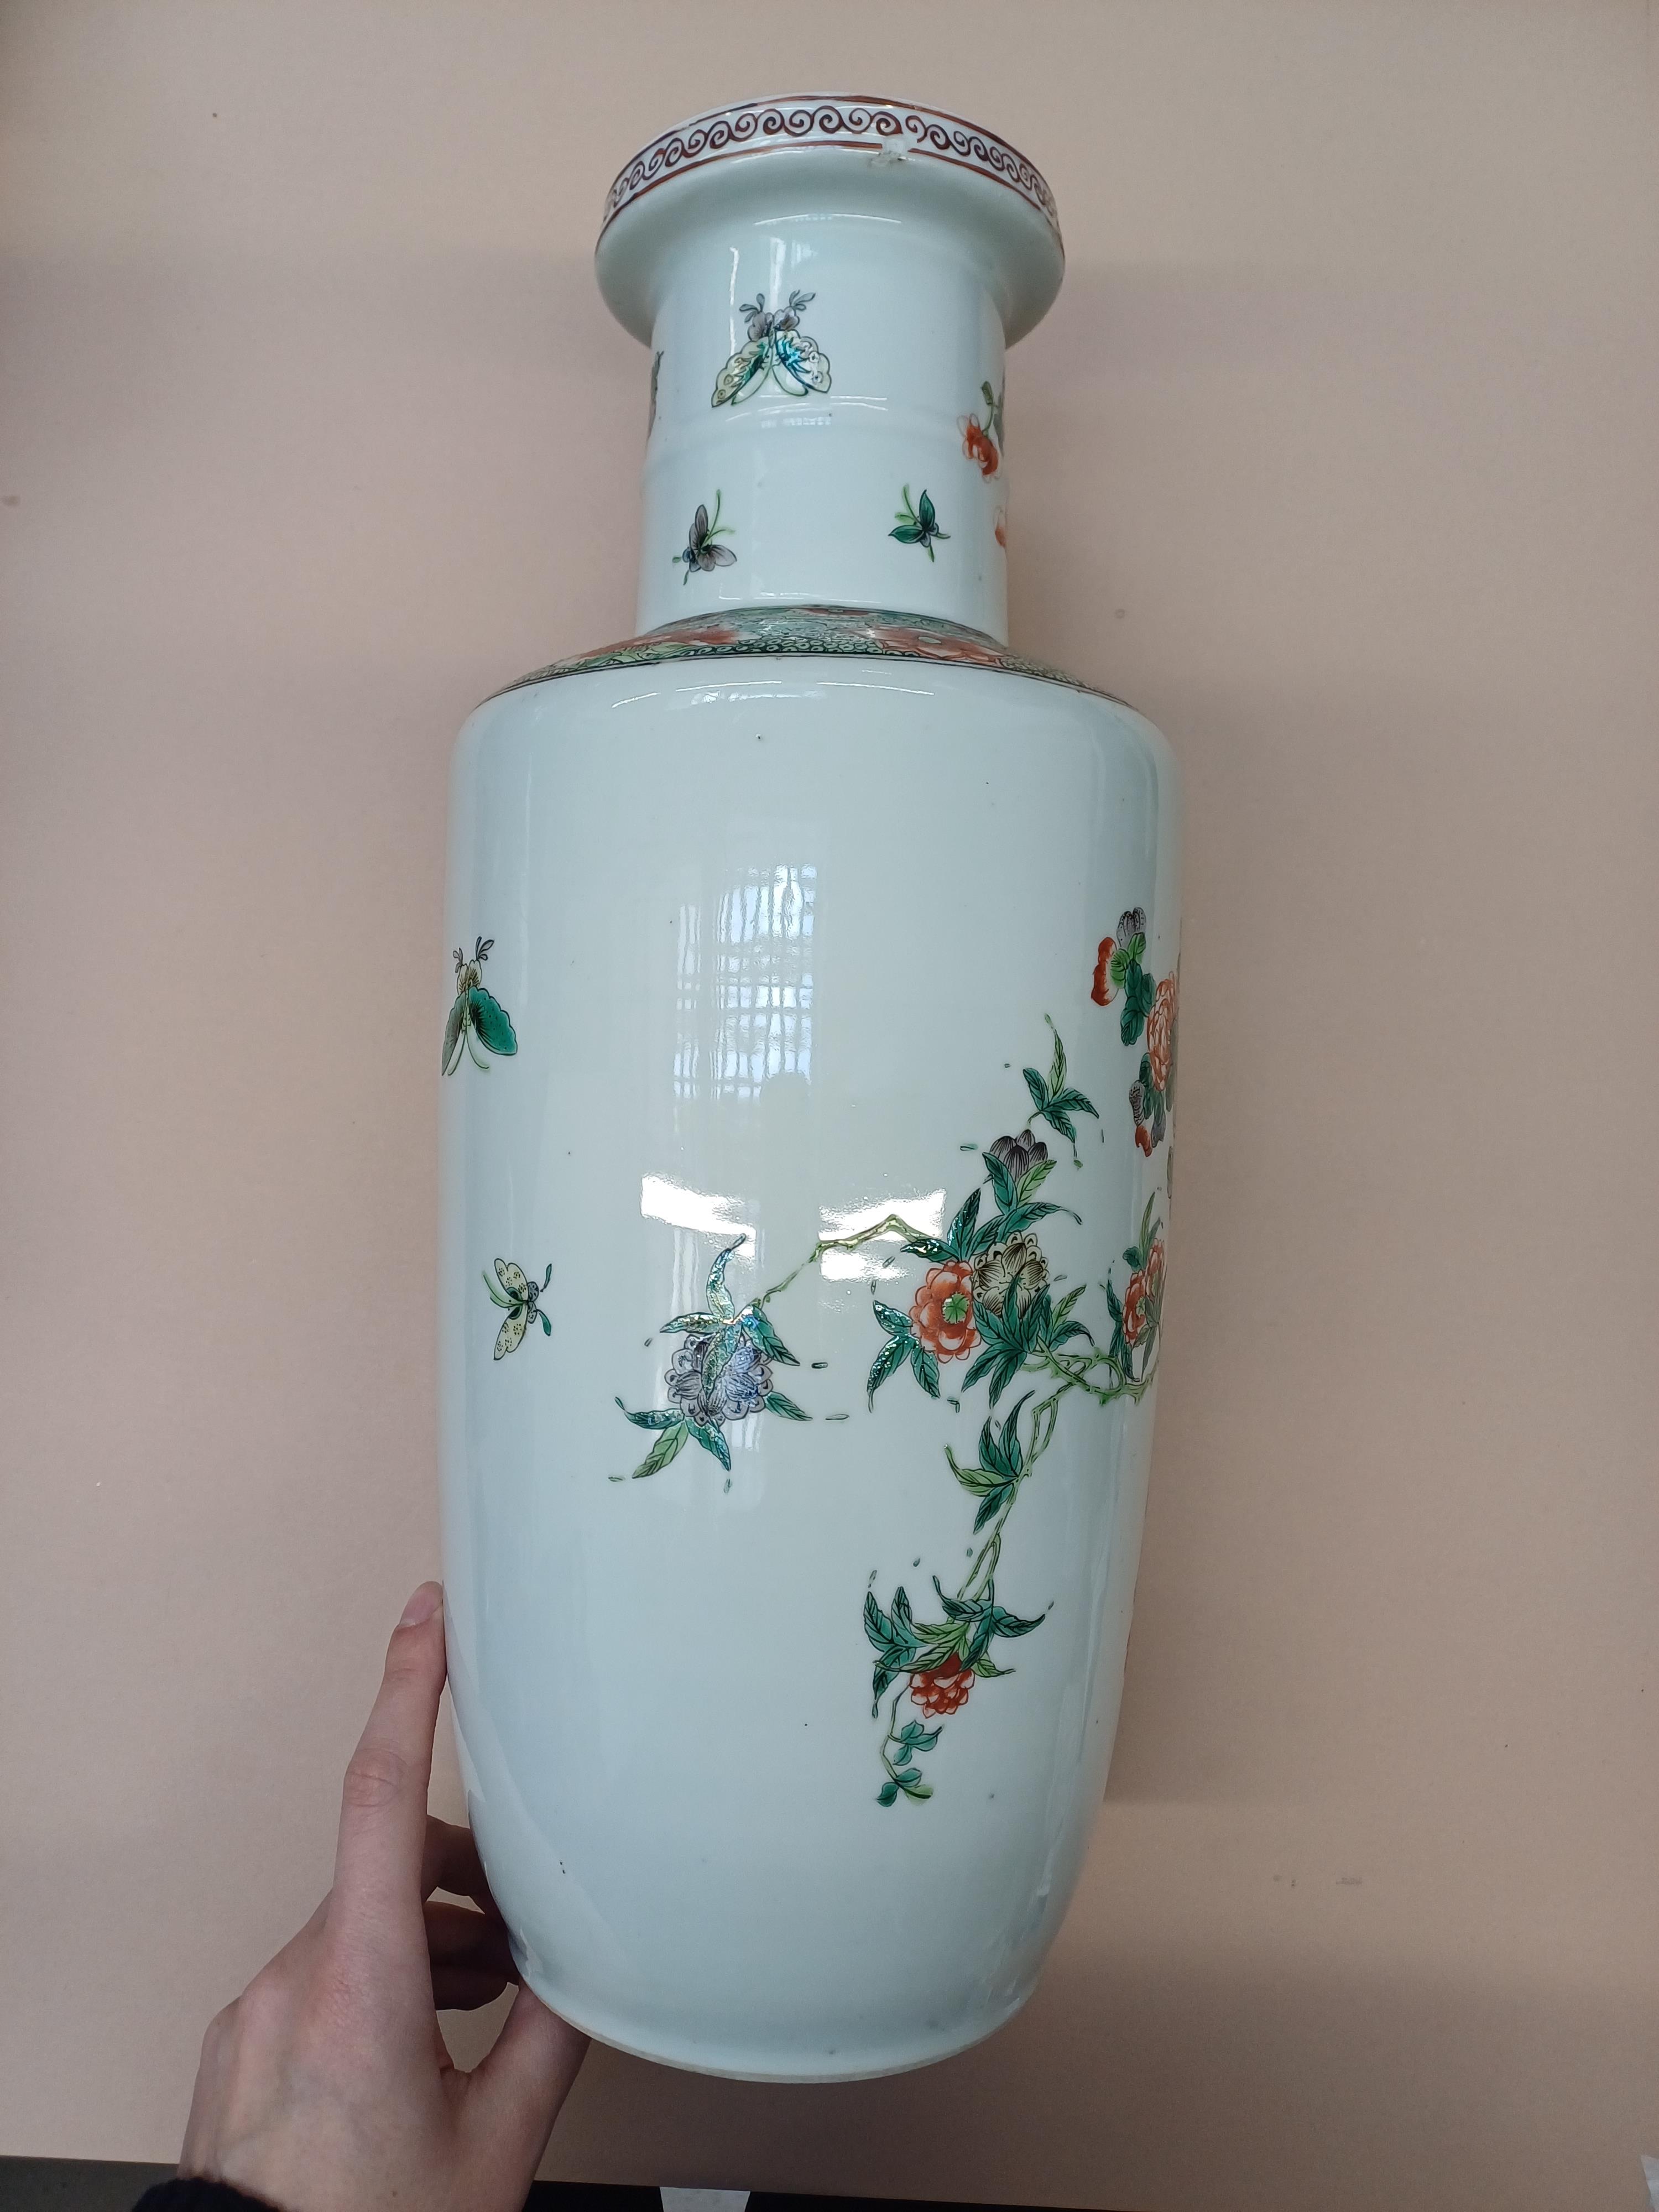 A PAIR OF FINE CHINESE FAMILLE-VERTE ‘BIRD AND BLOSSOM’ VASES 清康熙 五彩花鳥圖紋瓶一對 - Image 5 of 16